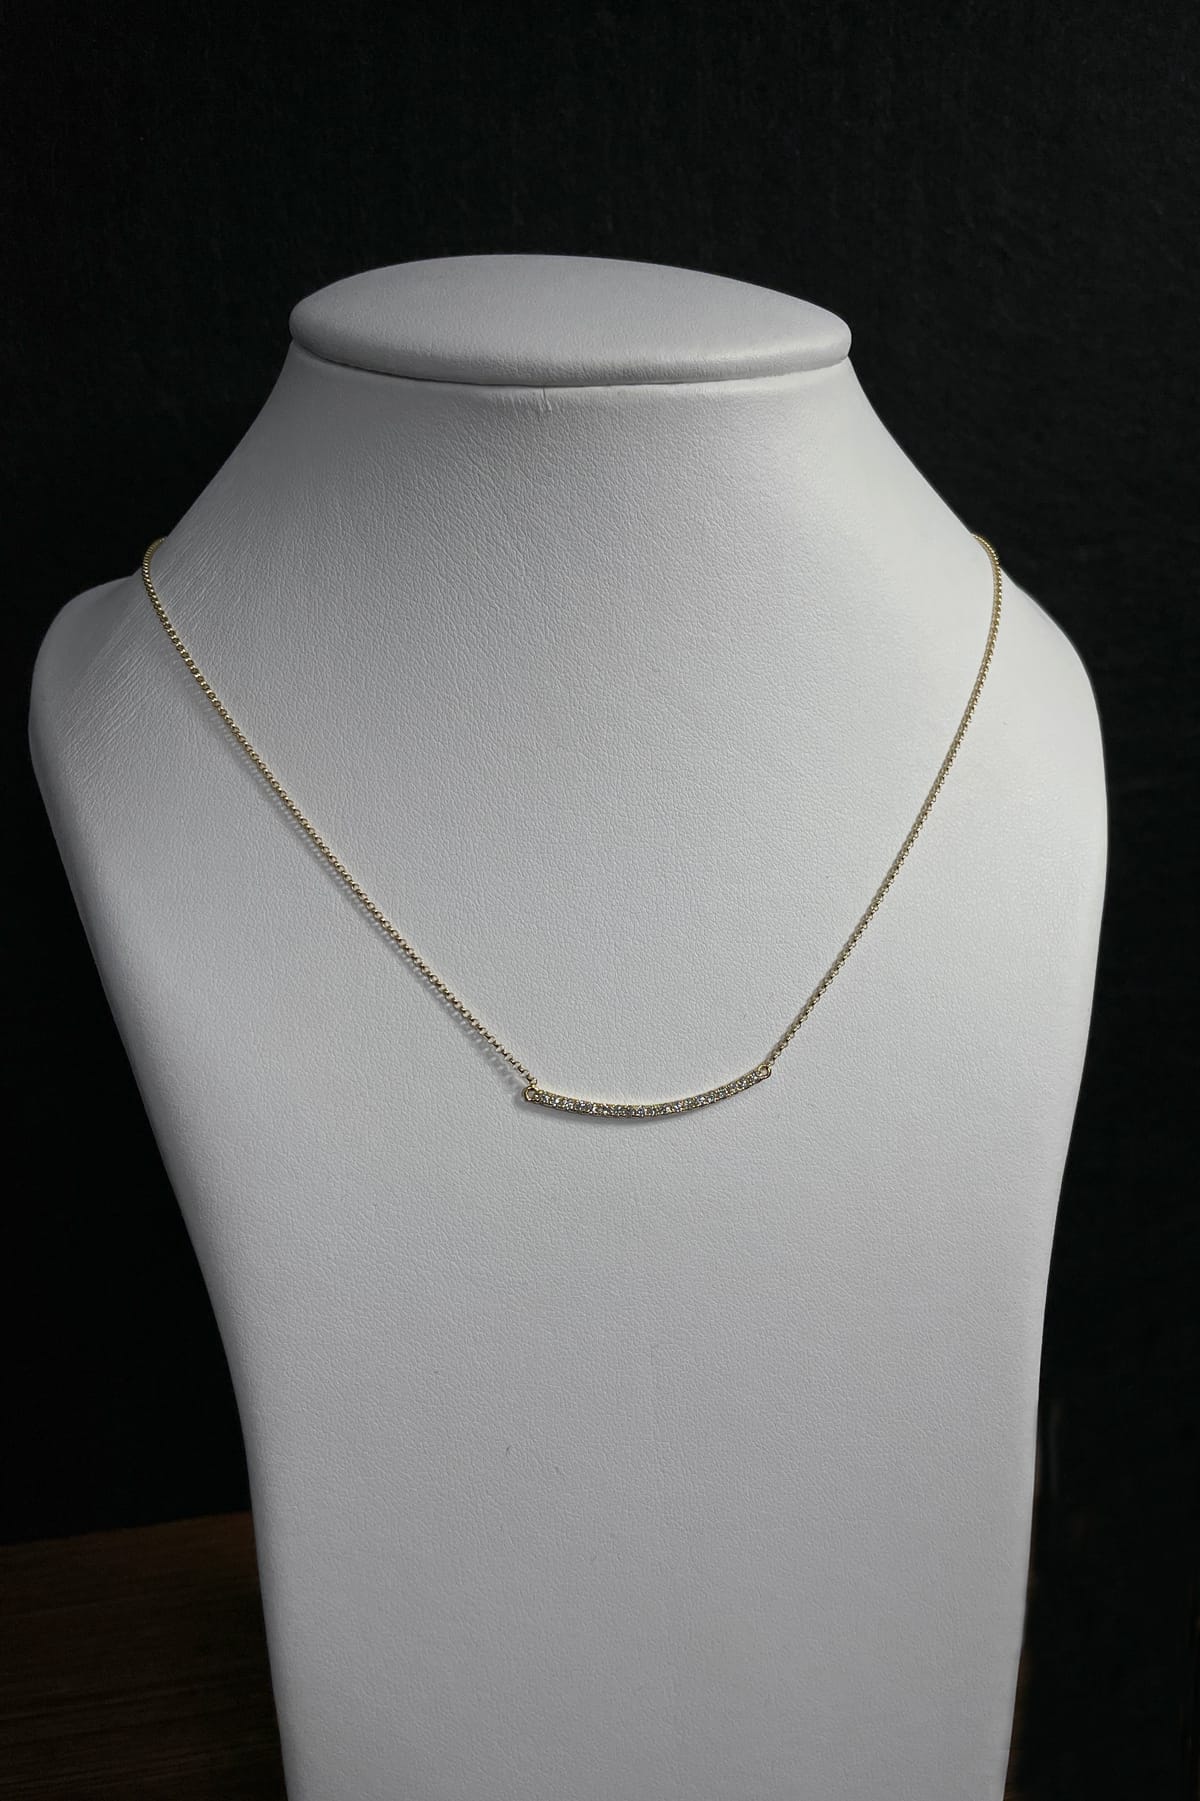 18 Carat Yellow Gold Curved Bar Necklace available at LeGassick Diamonds and Jewellery Gold Coast, Australia.